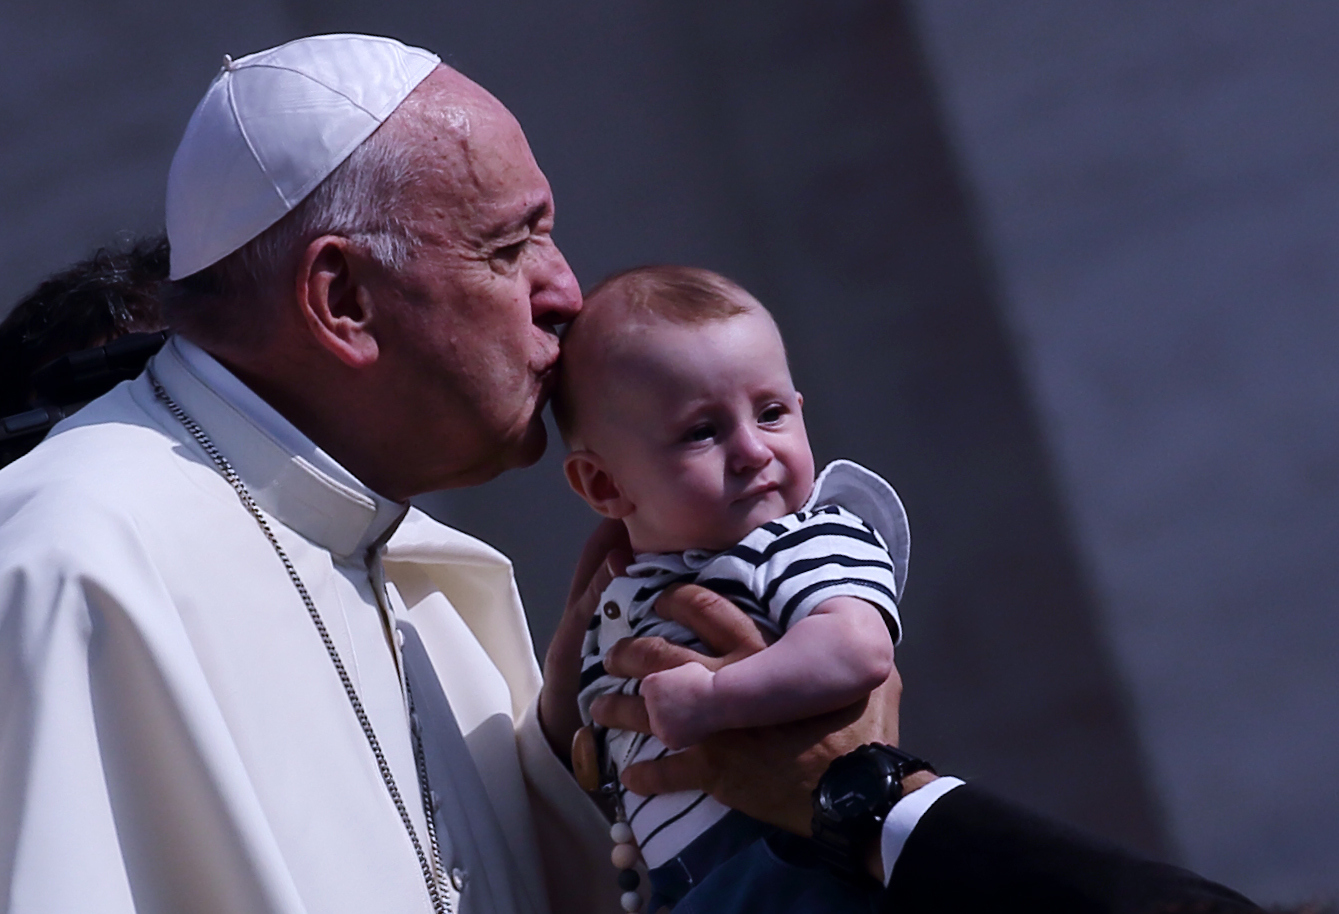 Church must learn how to speak to young people, pope says